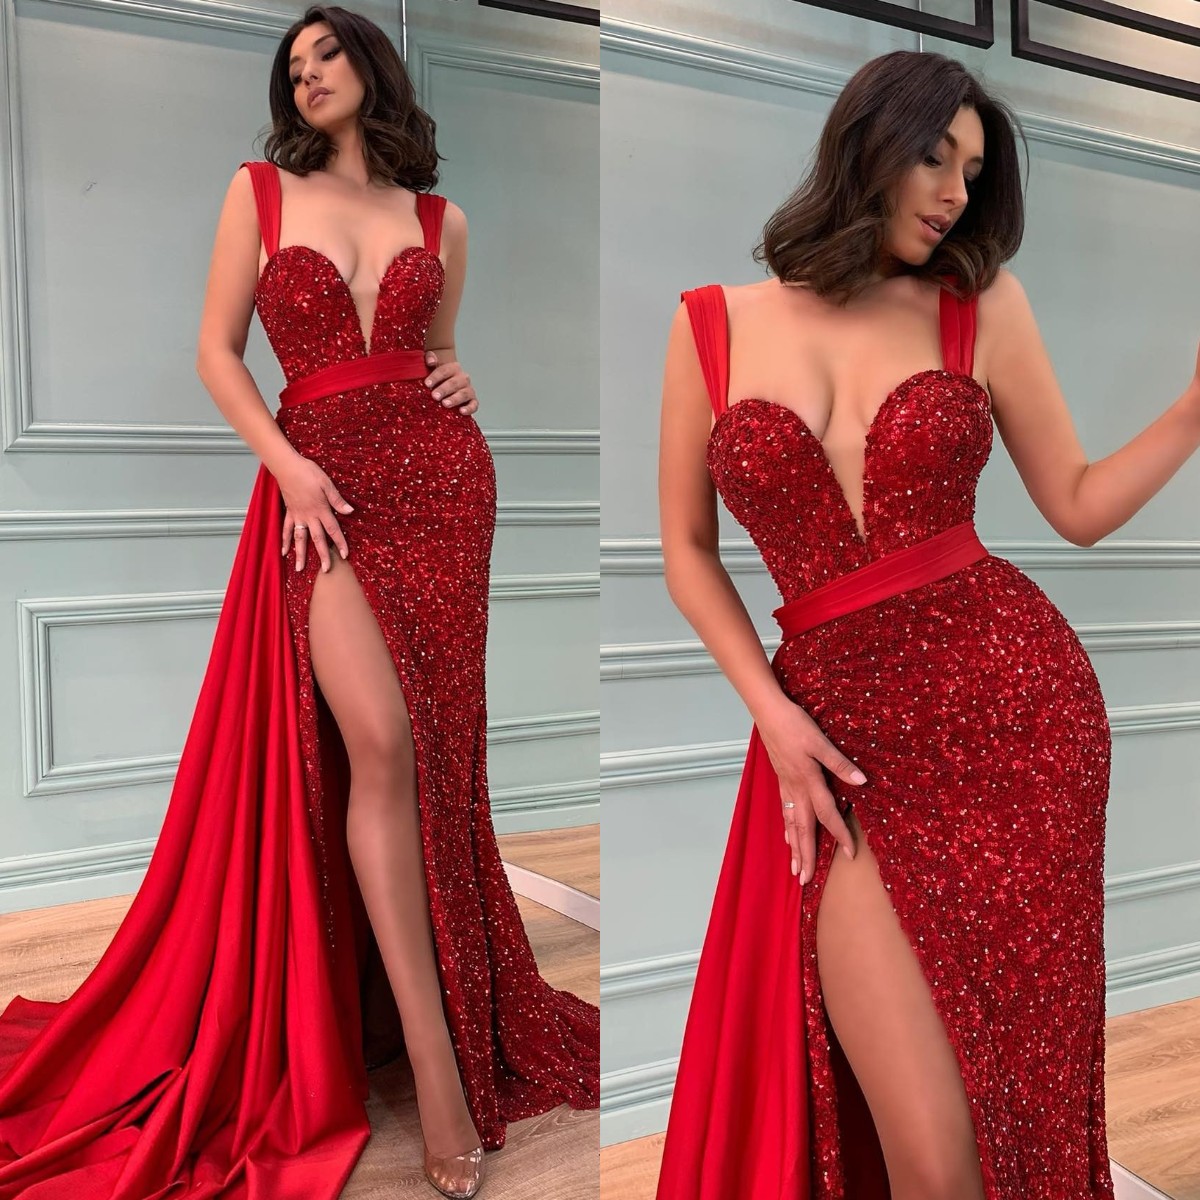 

Sexy Red Sequins Prom Dresses Straps Overskirts Evening Gowns Slit Pleats Formal Red Carpet Long Special Occasion Party dress, Customize